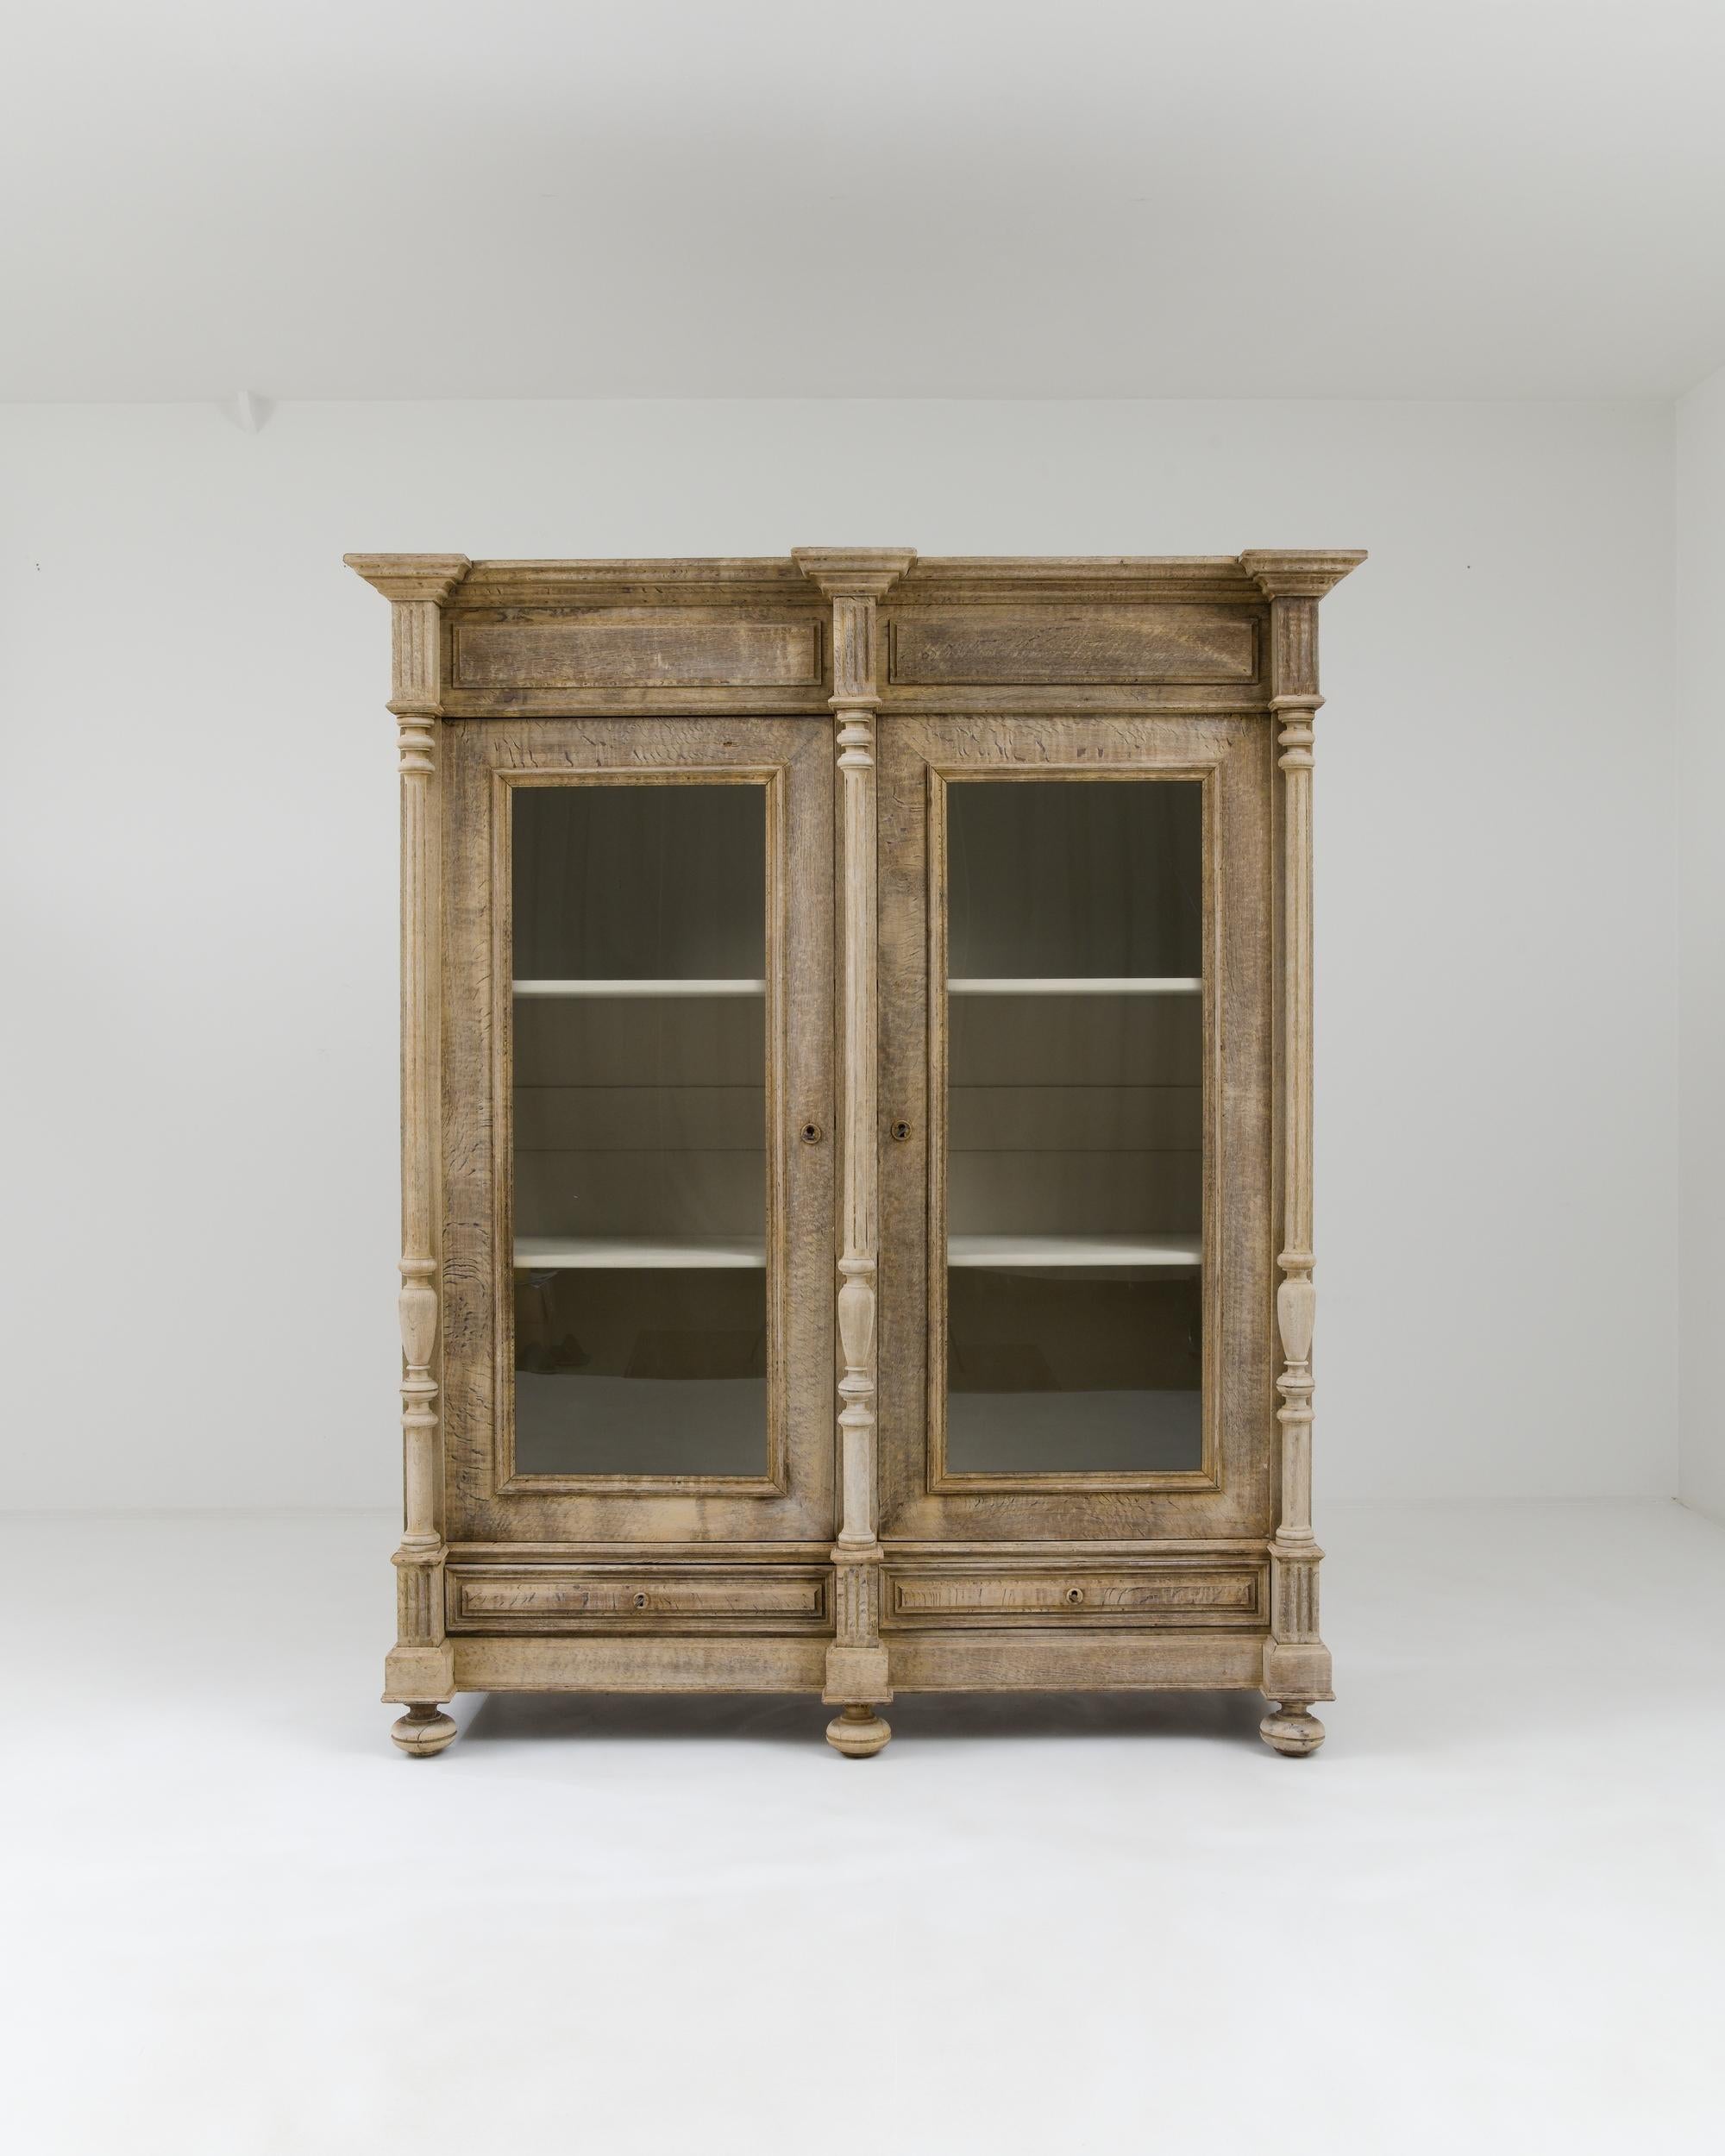 A wooden vitrine created in 19th century, France. A grand demonstration of elite craftsmanship and classical beauty, this enormous vitrine towers overhead with a regal aura. The patinated oak has been carefully restored with a bleached finish,